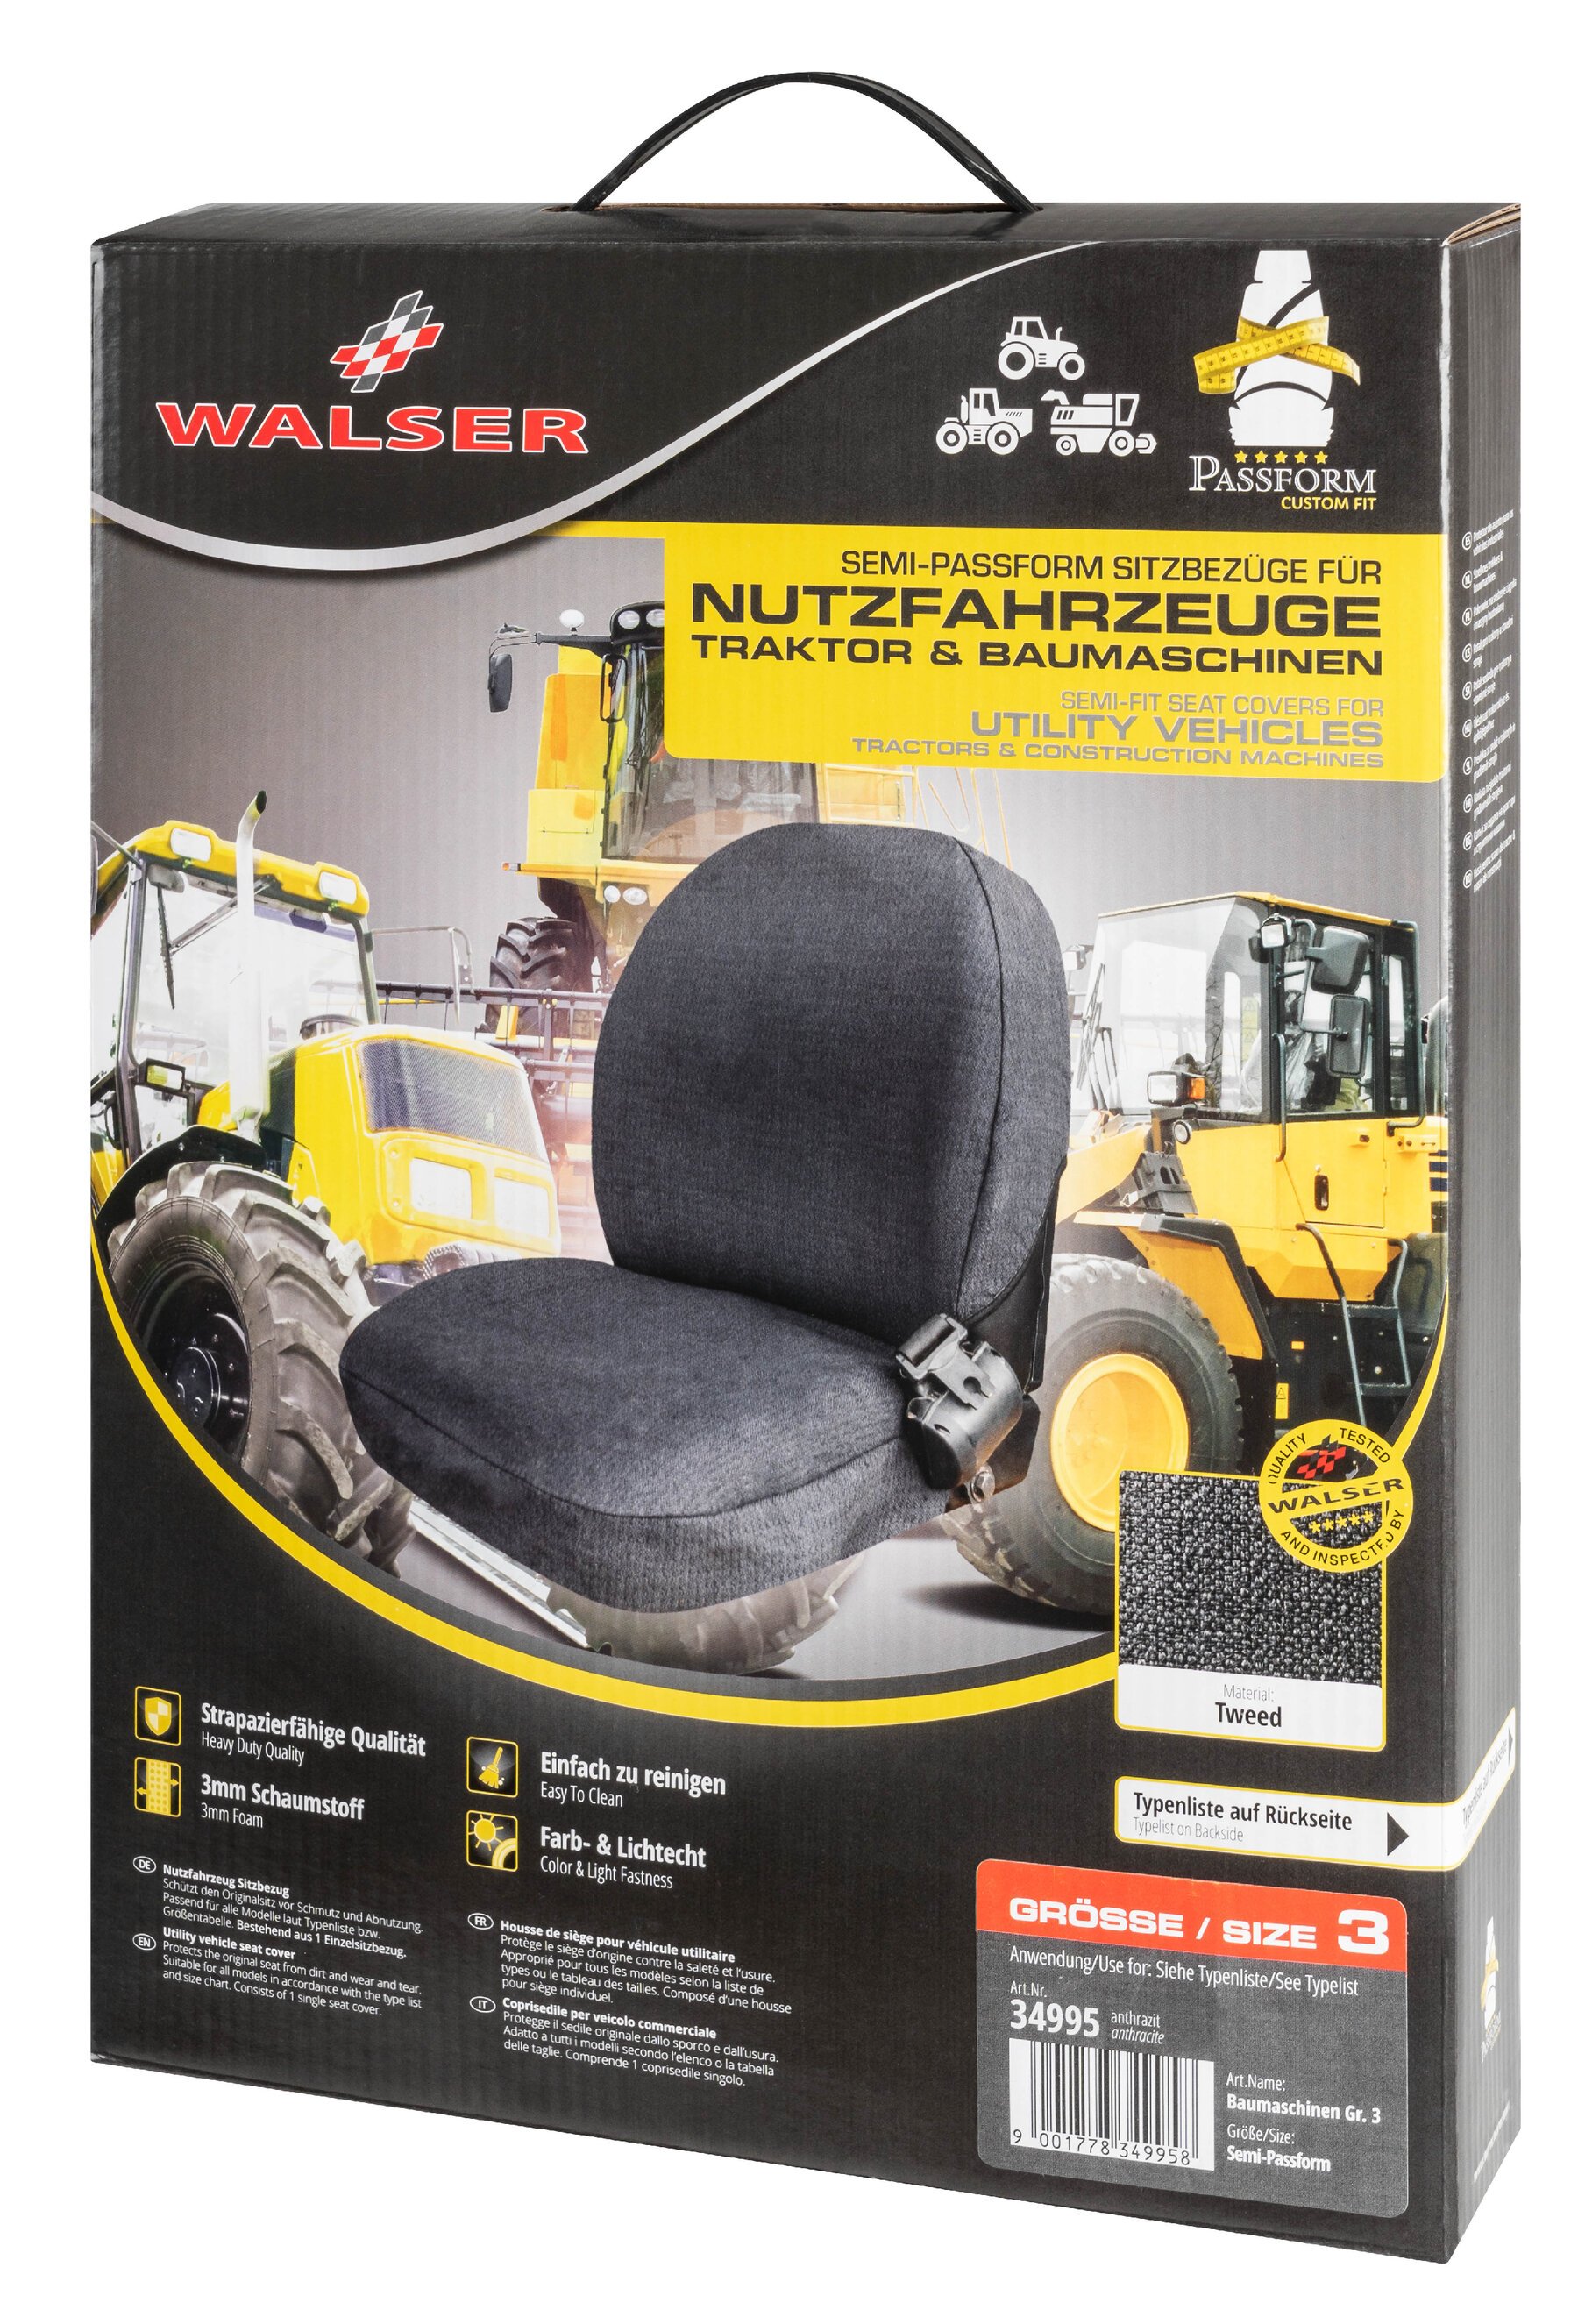 Semi-fit Seat cover for tractors and construction machinery - size 3